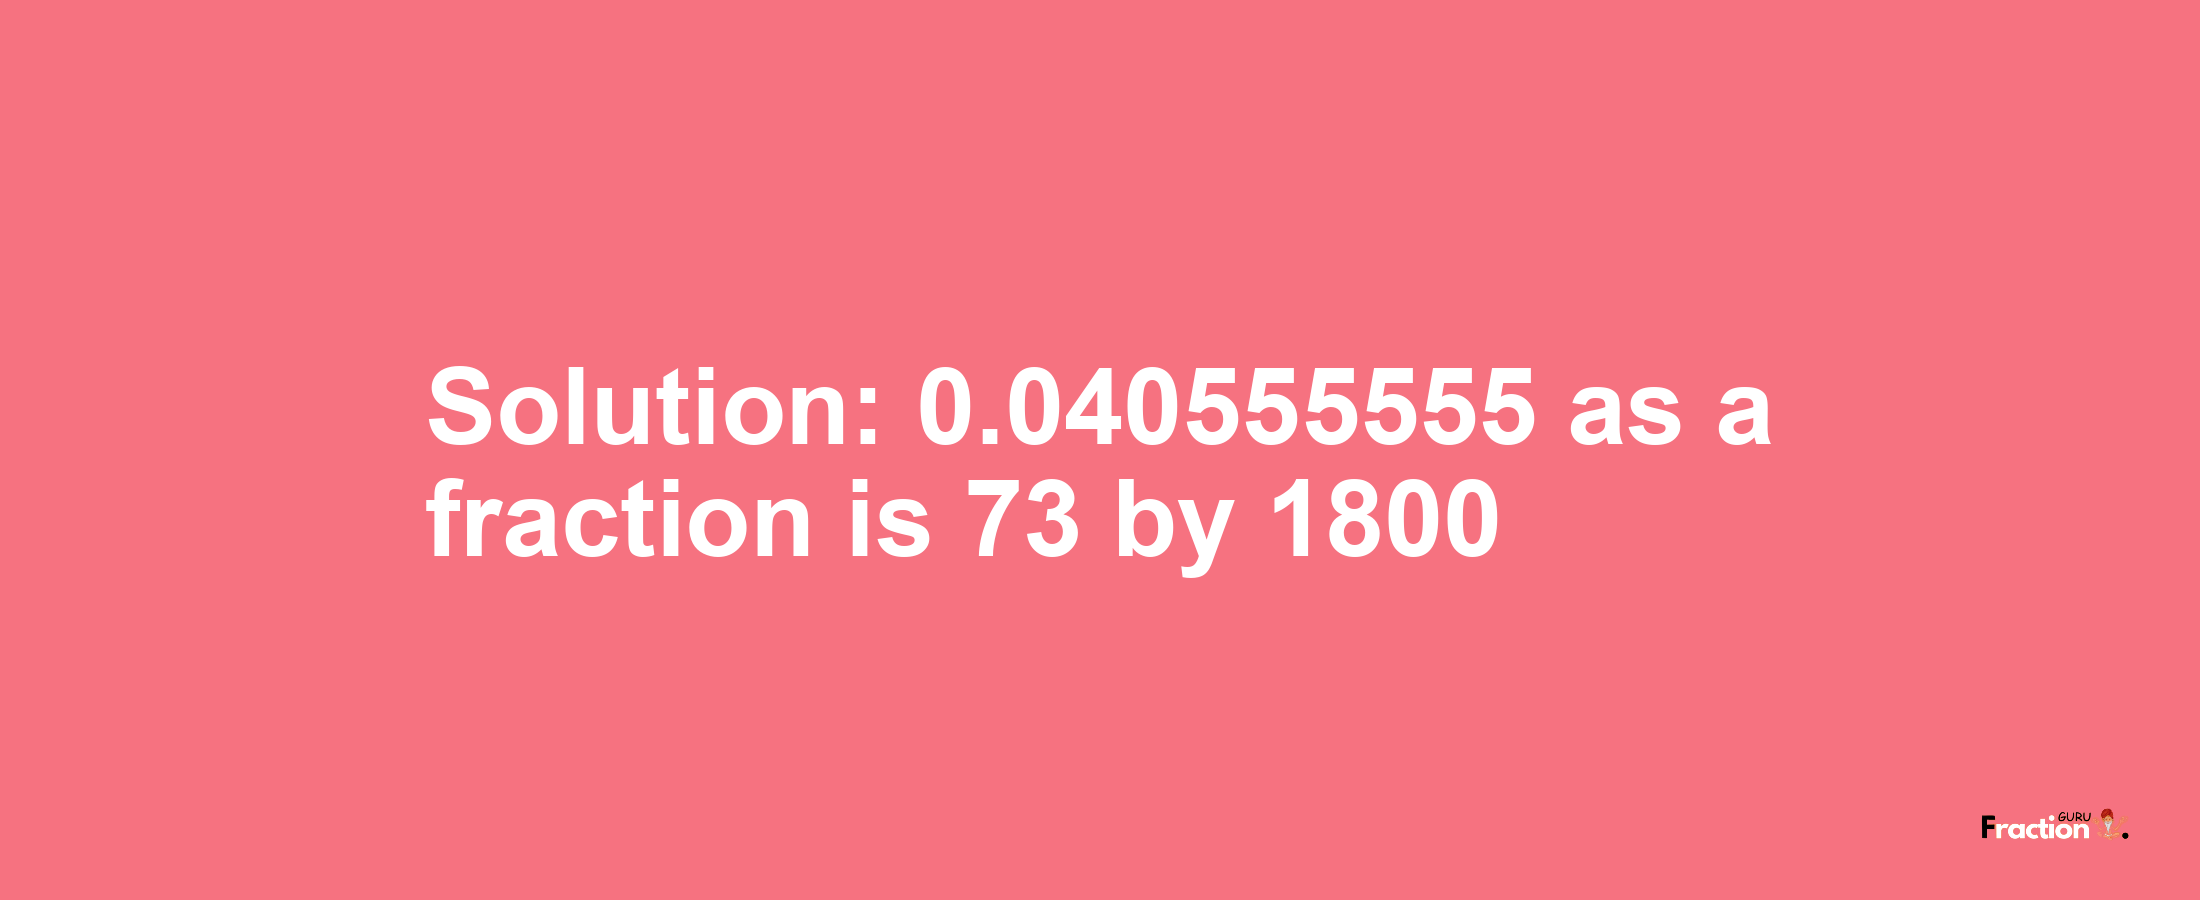 Solution:0.040555555 as a fraction is 73/1800